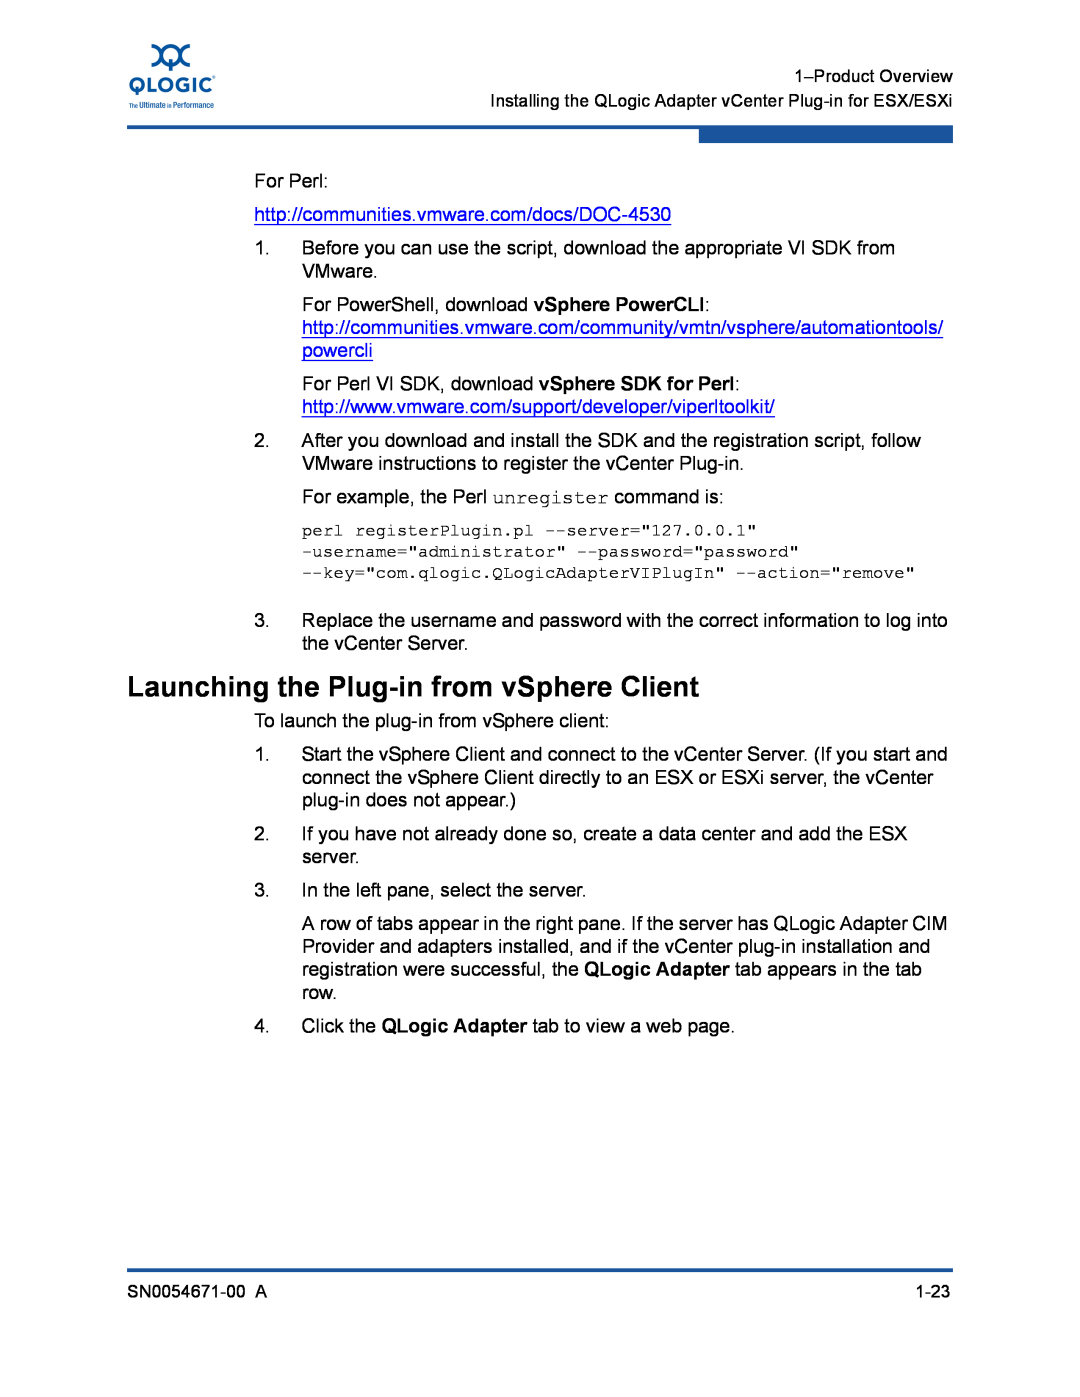 Q-Logic 3200, 8200 manual Launching the Plug-in from vSphere Client, http//communities.vmware.com/docs/DOC-4530 